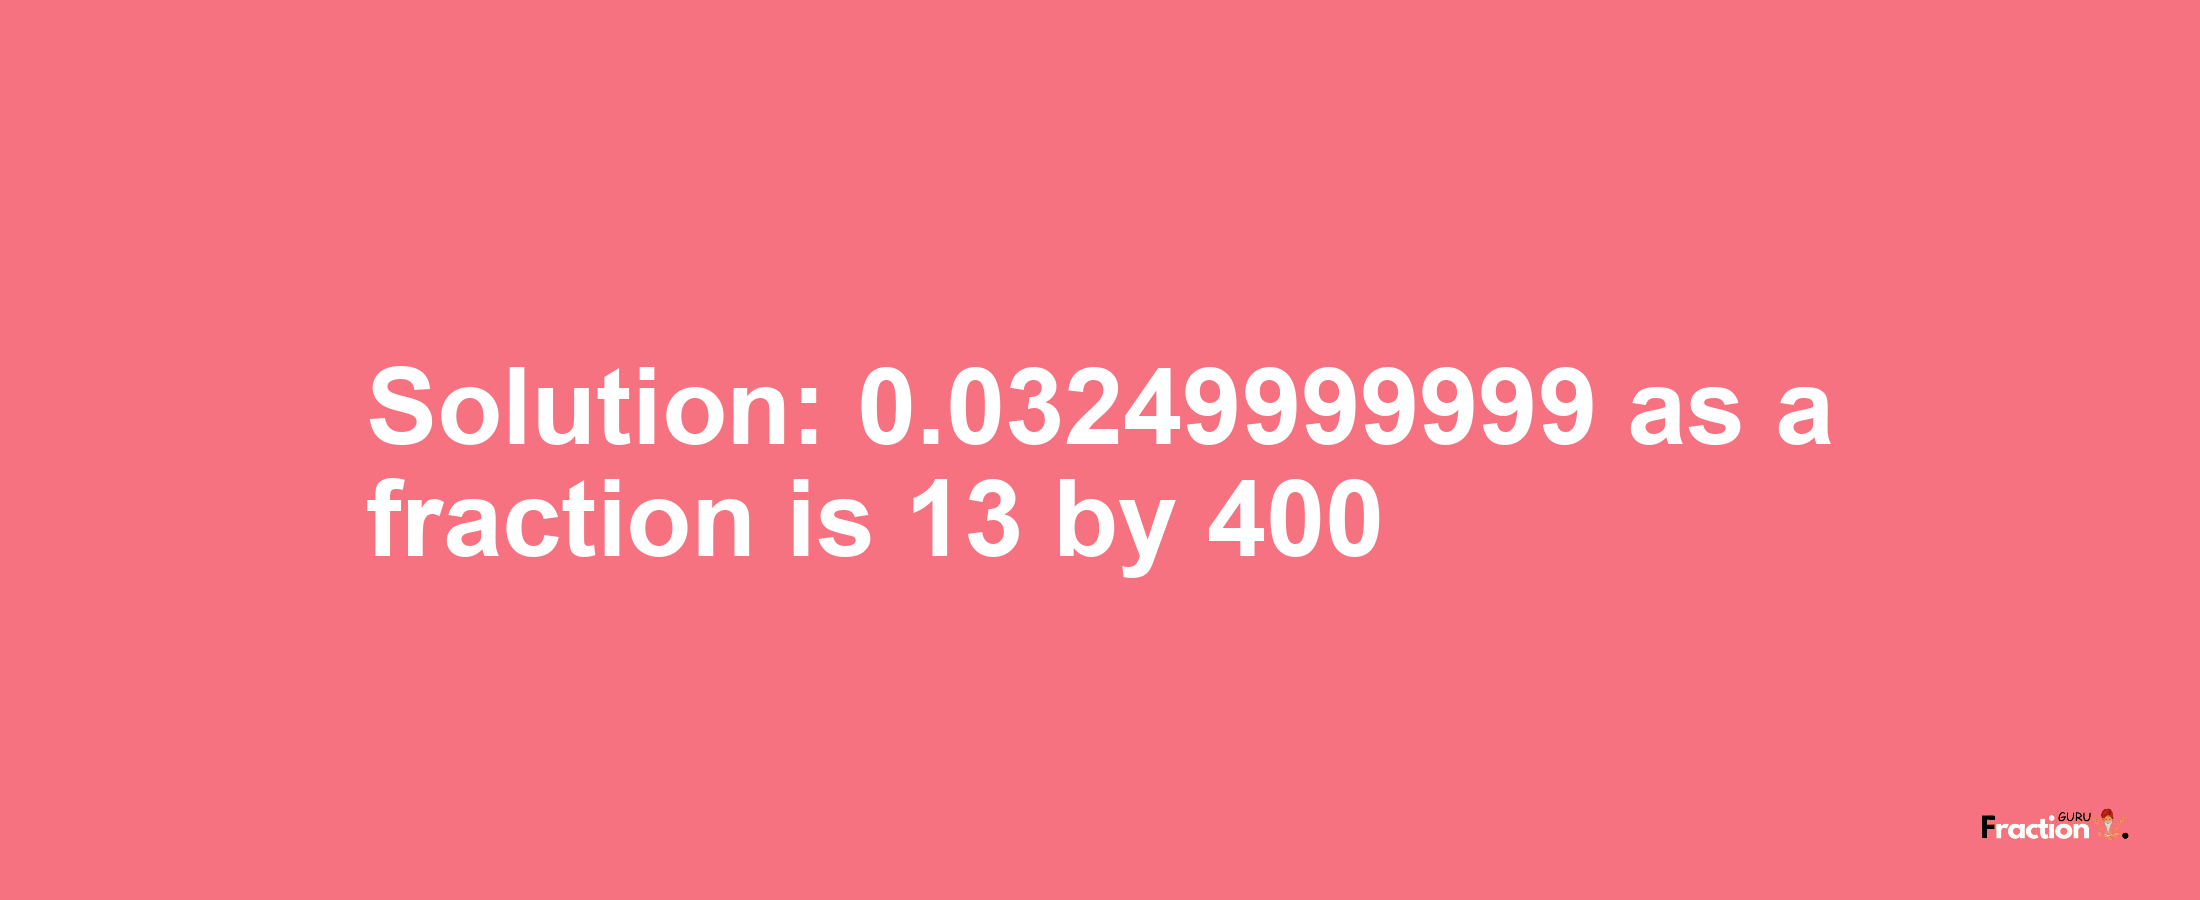 Solution:0.03249999999 as a fraction is 13/400